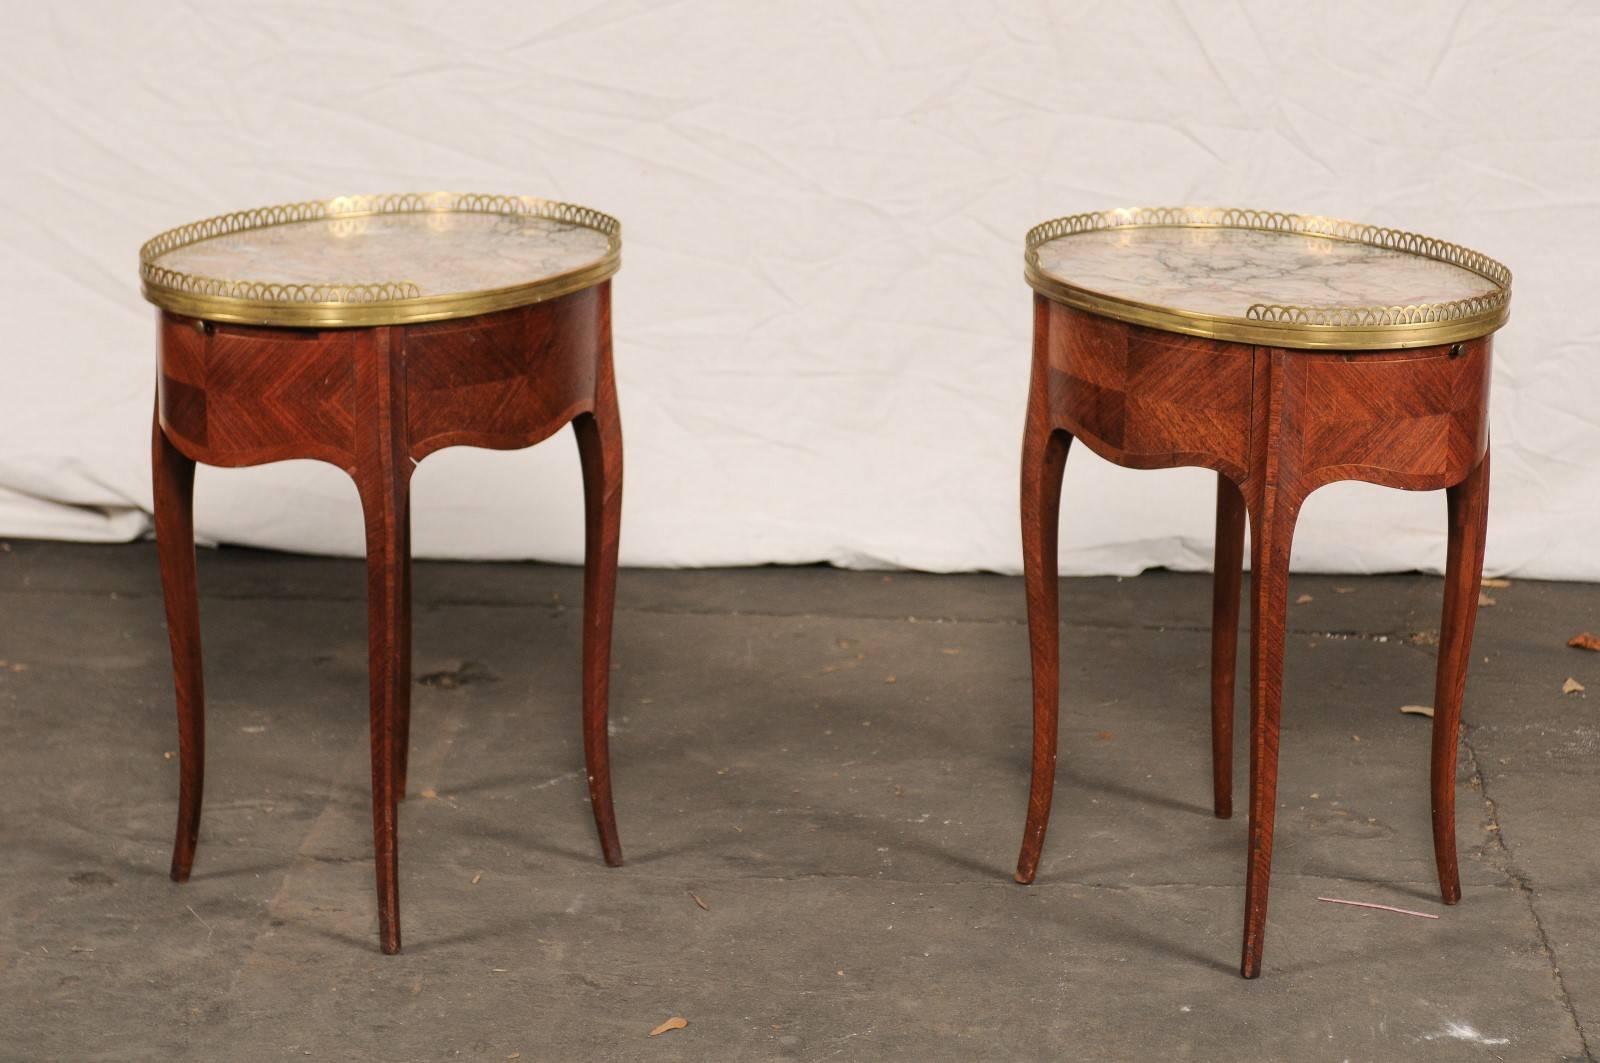 Pair of circa 1900 French Marble-Top, Bronze Gallery Tables with Drawers 2